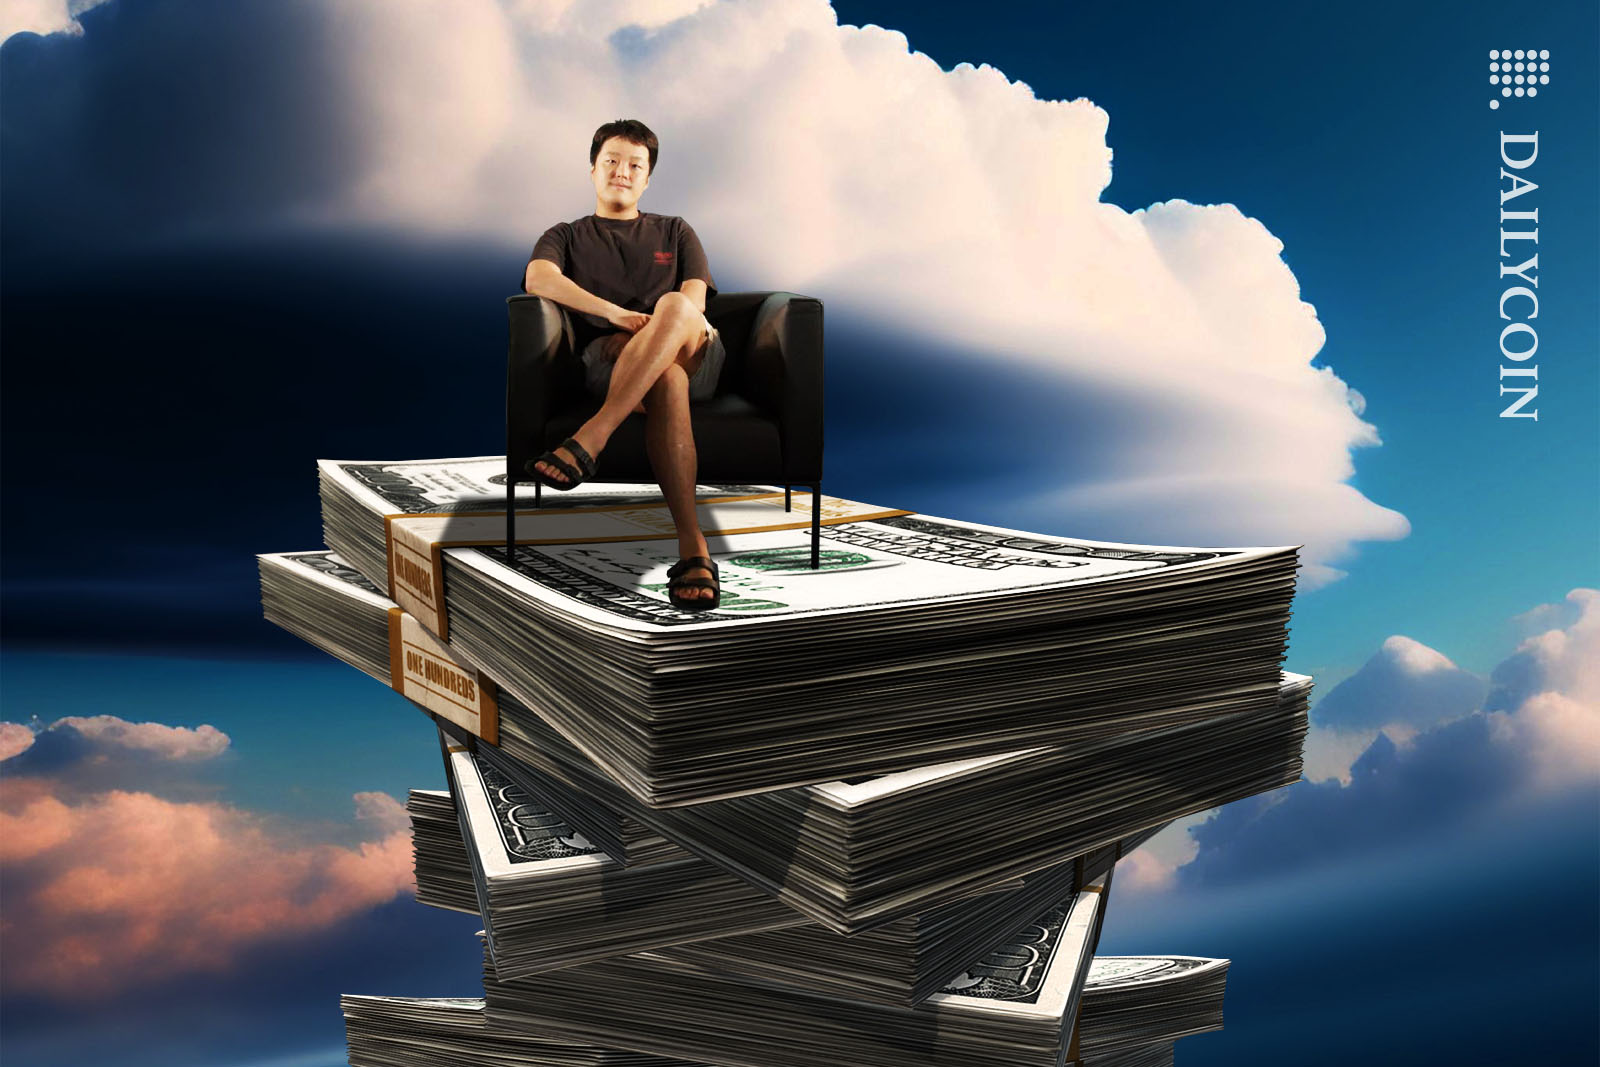 Do Kwon sitting on a giant pile of cash sky high wearing shorts and slippers.